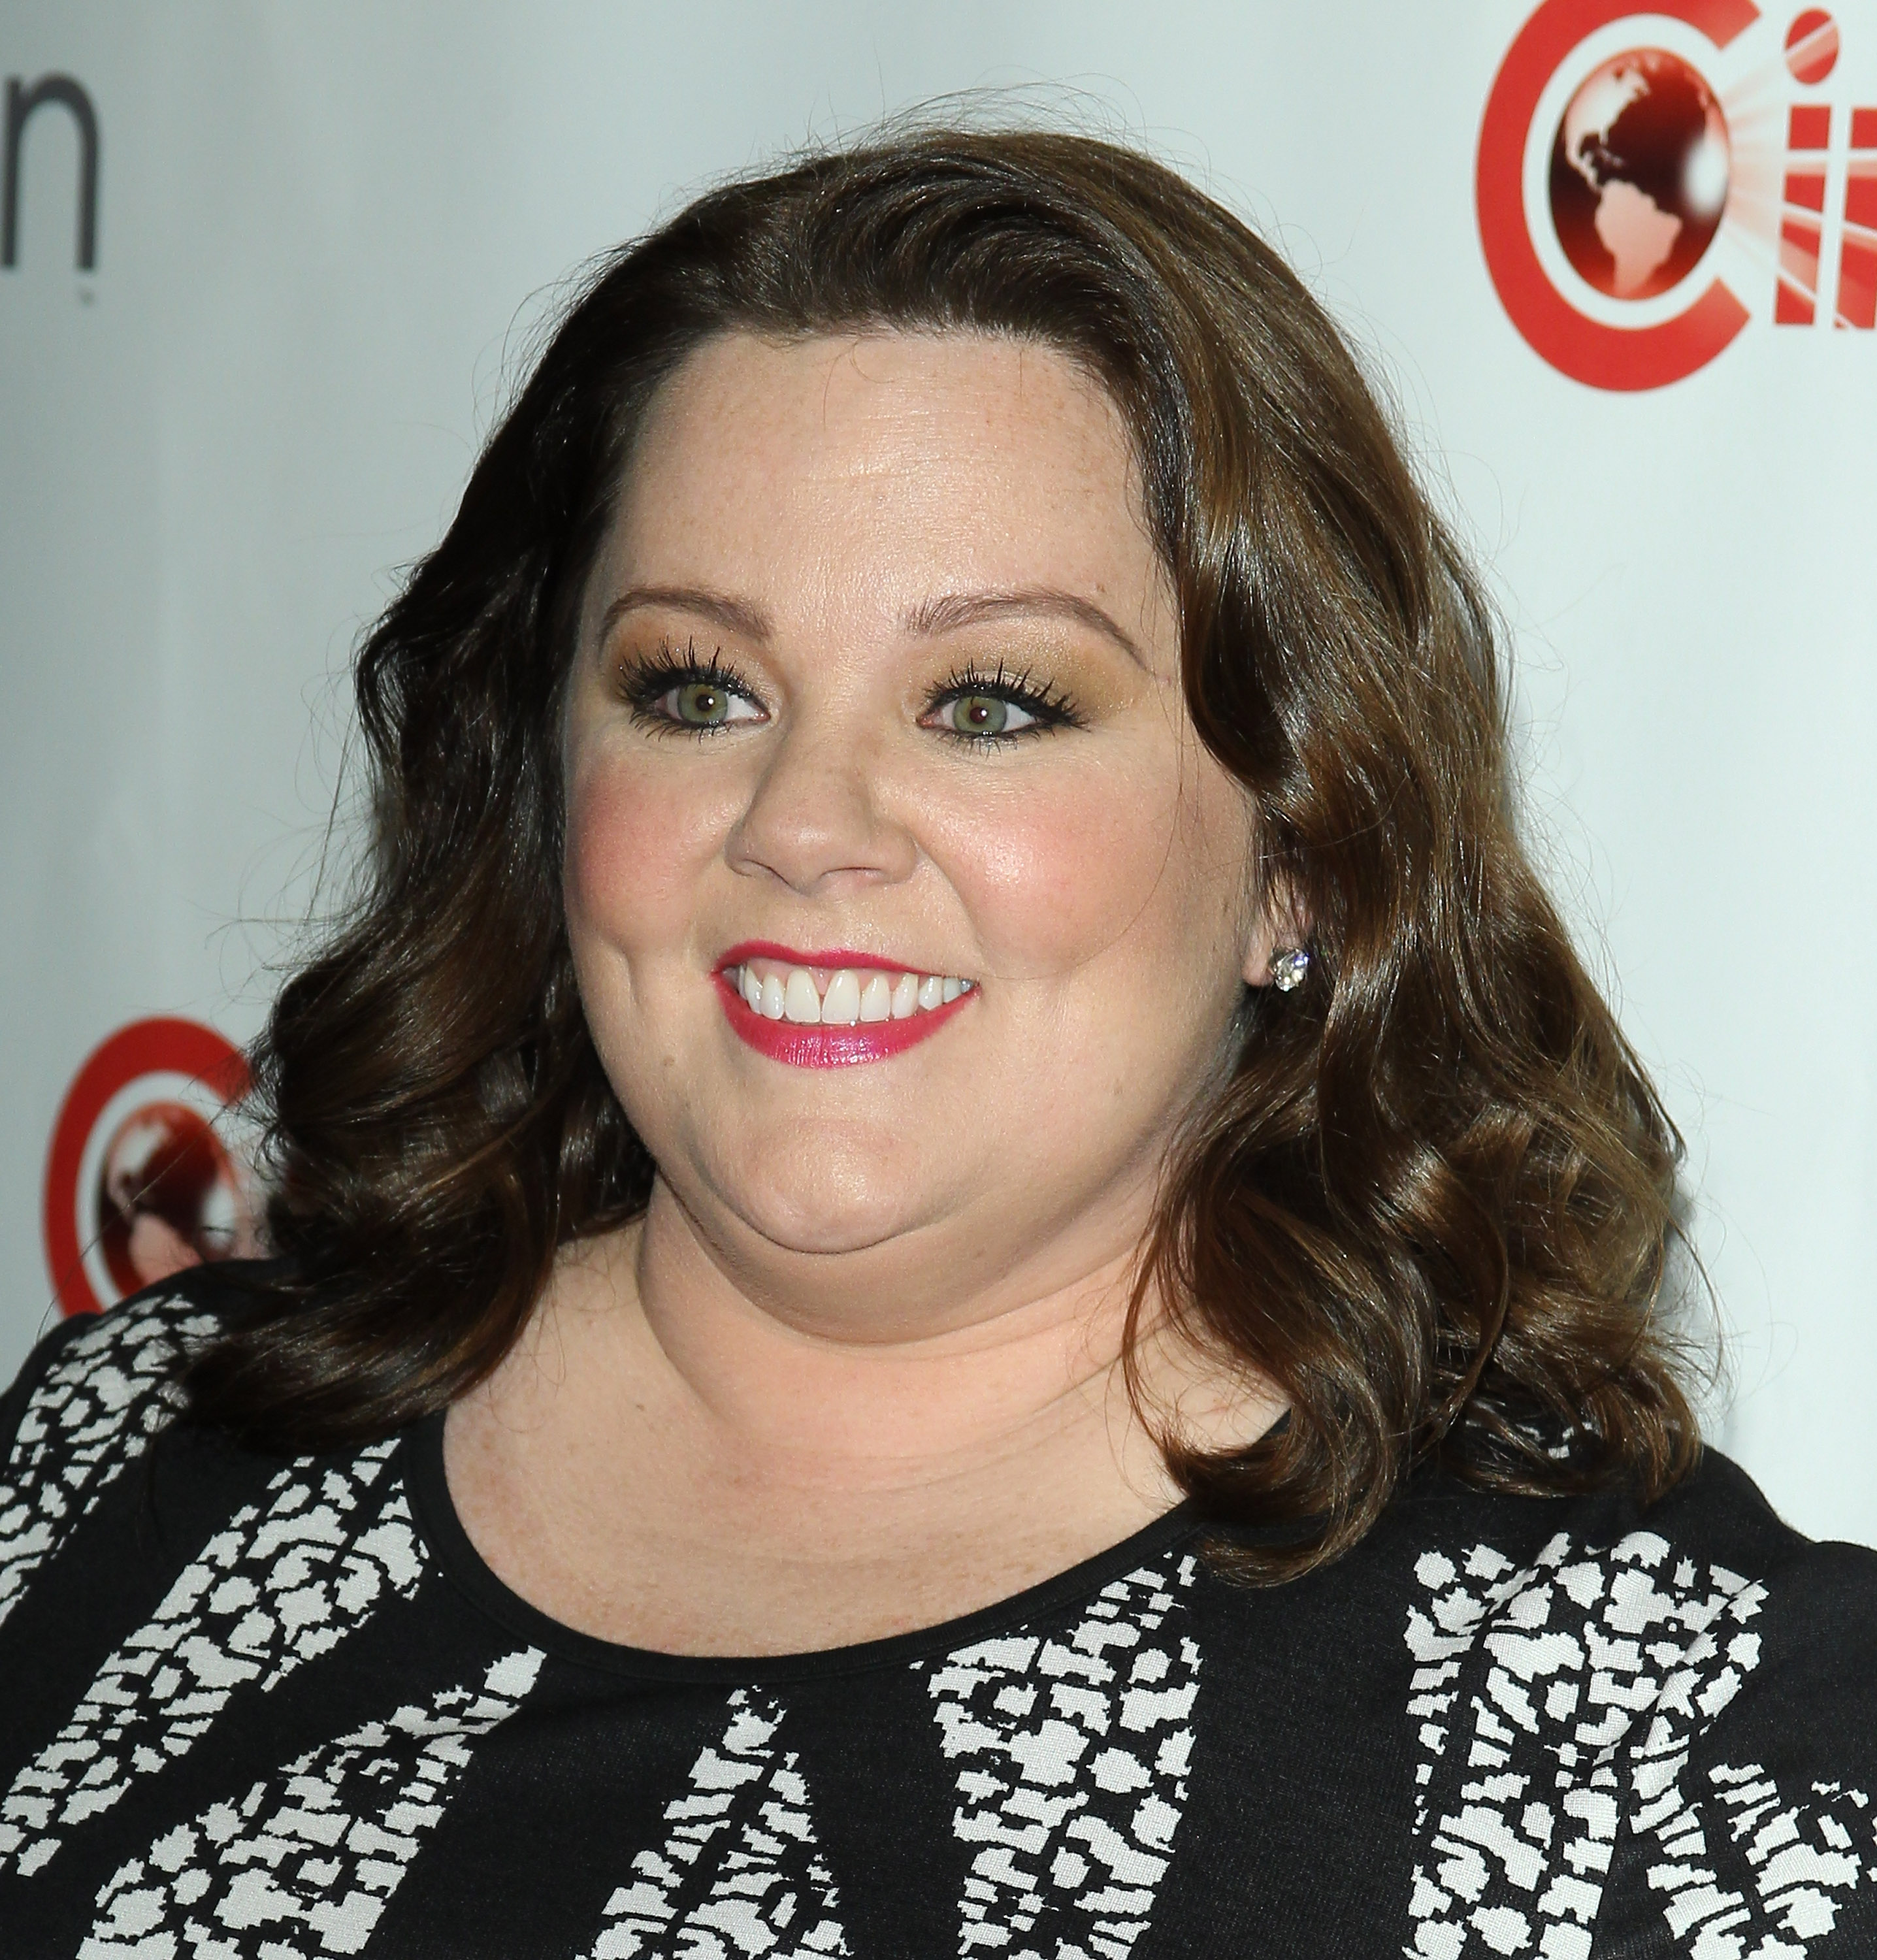 Melissa McCarthy at Cinemacon in Las Vegas, Nevada on March 27, 2014 | Source: Getty Images